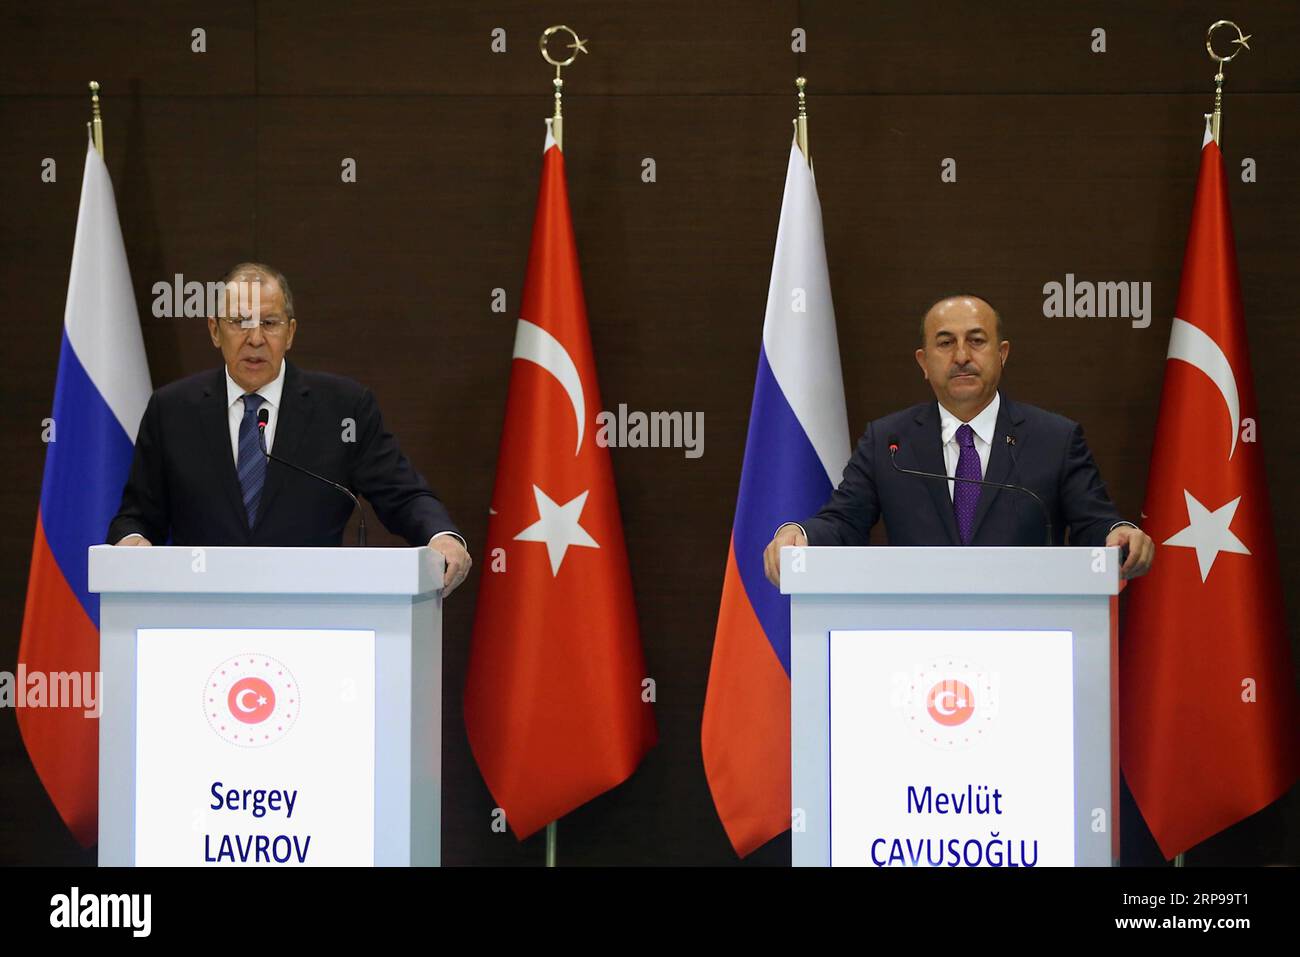 (190329) -- ANTALYA, March 29, 2019 (Xinhua) -- Turkish Foreign Minister Mevlut Cavusoglu (R) and his Russian counterpart Sergey Lavrov attend a joint press conference in Antalya, Turkey, March 29, 2019. Turkey s foreign minister said Friday that the purchase of Russia s S-400 air defense systems is a done deal and refuted claims over possible delivery of these systems to a third country in order to avoid U.S. sanctions. (Xinhua) TURKEY-ANTALYA-FM-RUSSIA-LAVROV-MEETING PUBLICATIONxNOTxINxCHN Stock Photo